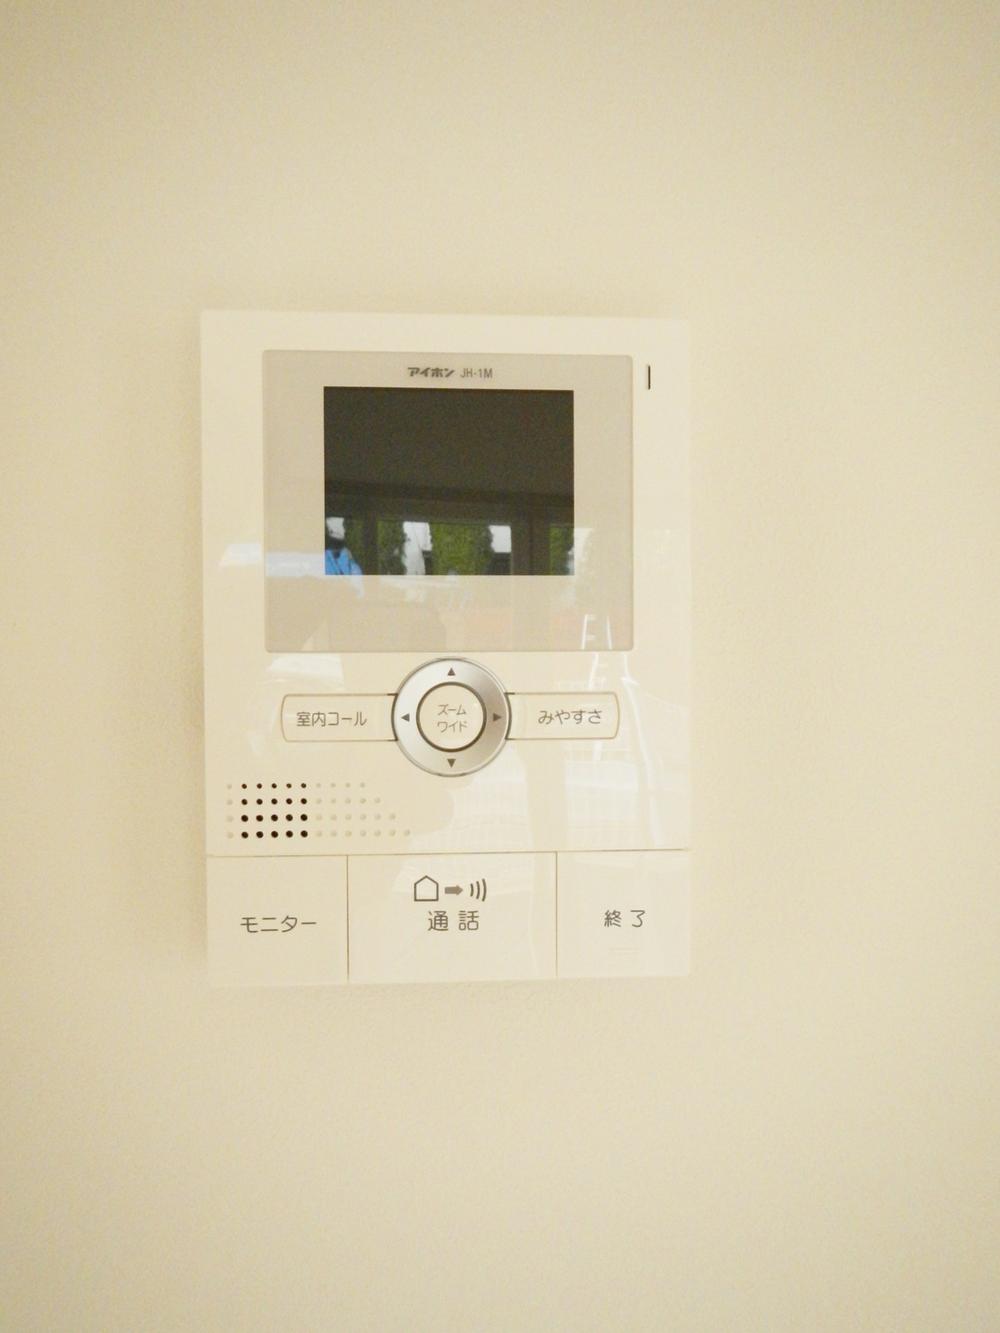 Other Equipment. Even when not out on the doorstep, such as the bath or cooking in, Even when you do not want your voice mail only in children, You can support the visitor in this TV monitor intercom!